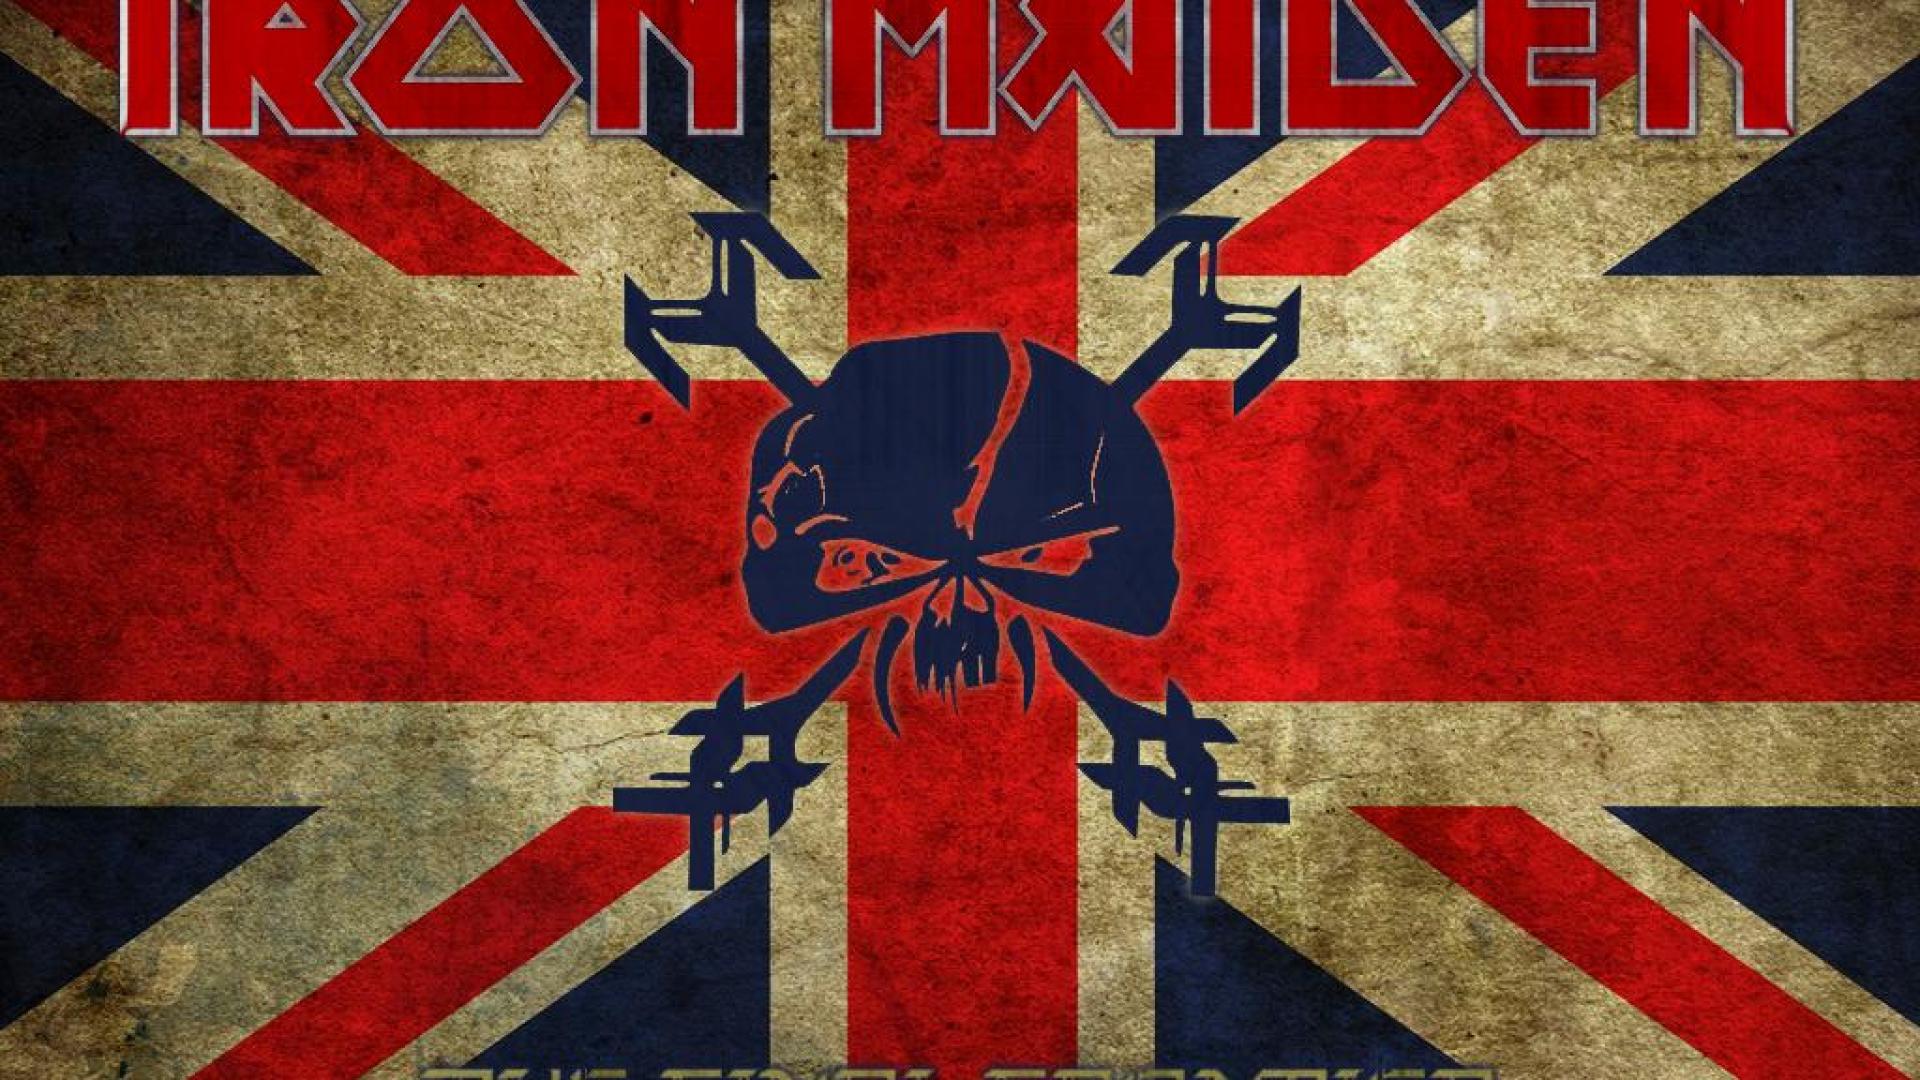 Nice Images Collection: Iron Maiden Desktop Wallpapers